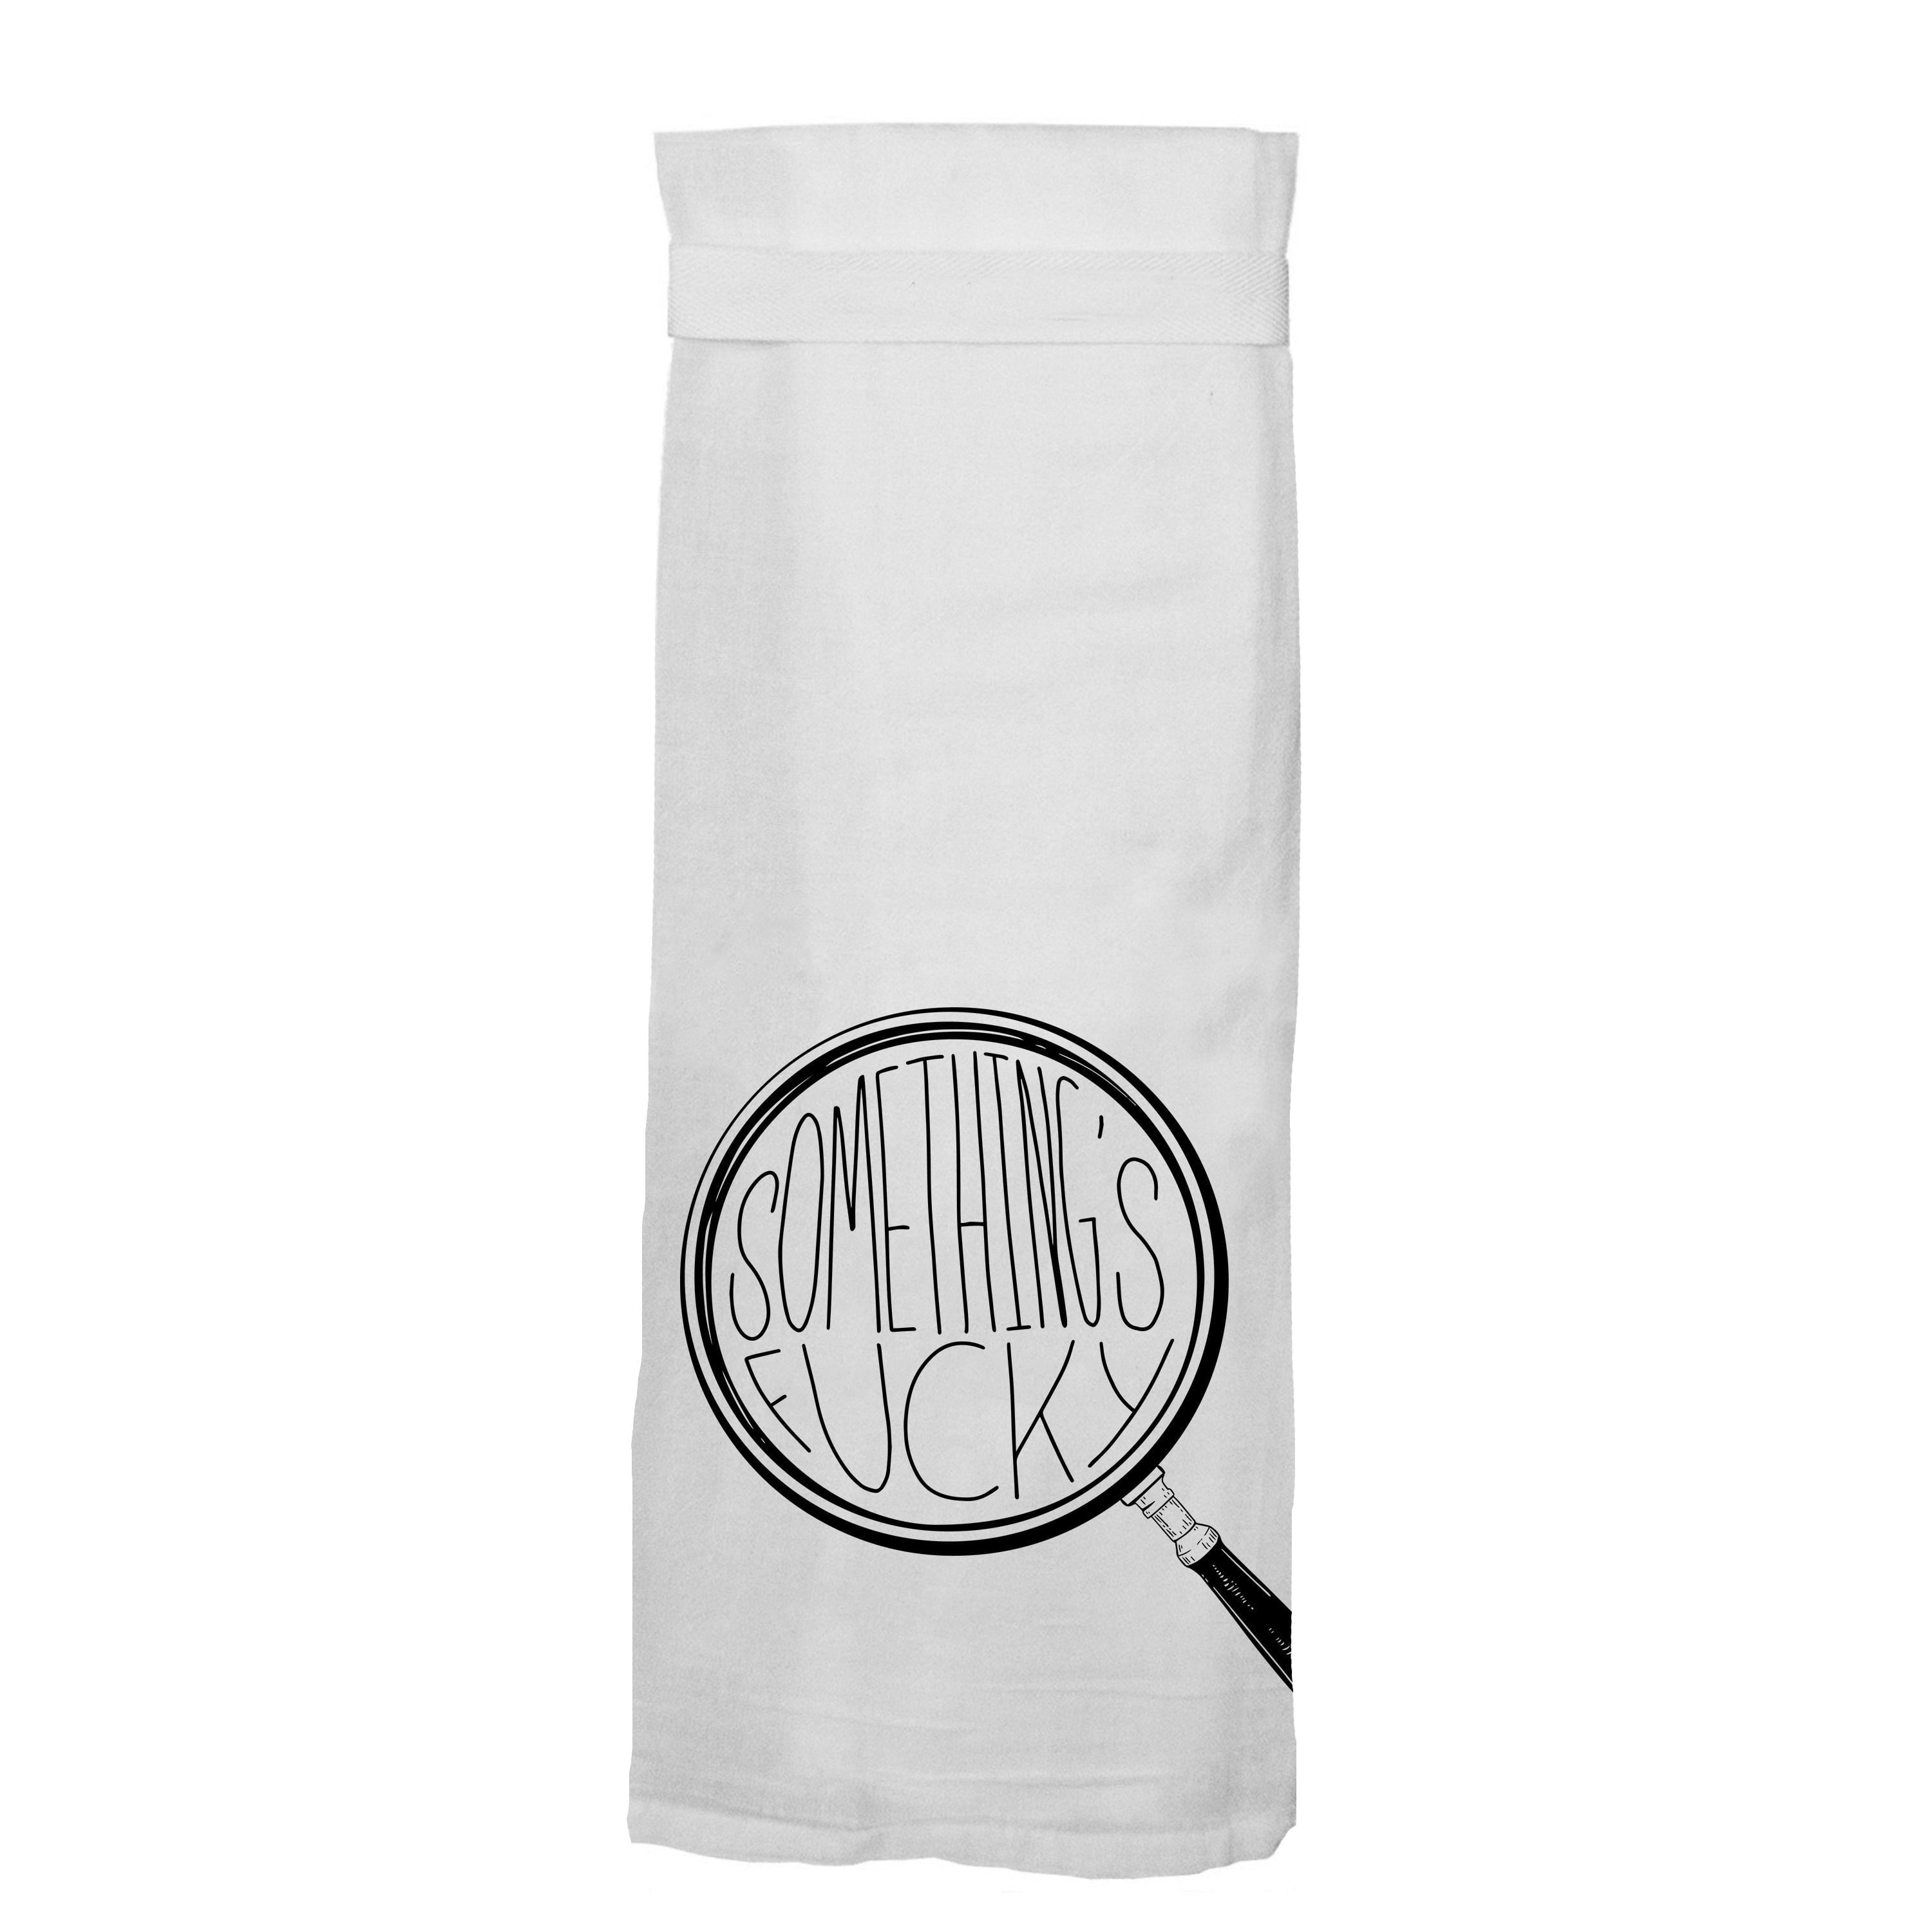 Clean Kitchen Dirty Mouth Flour Sack Tea Towels, Twisted Wares